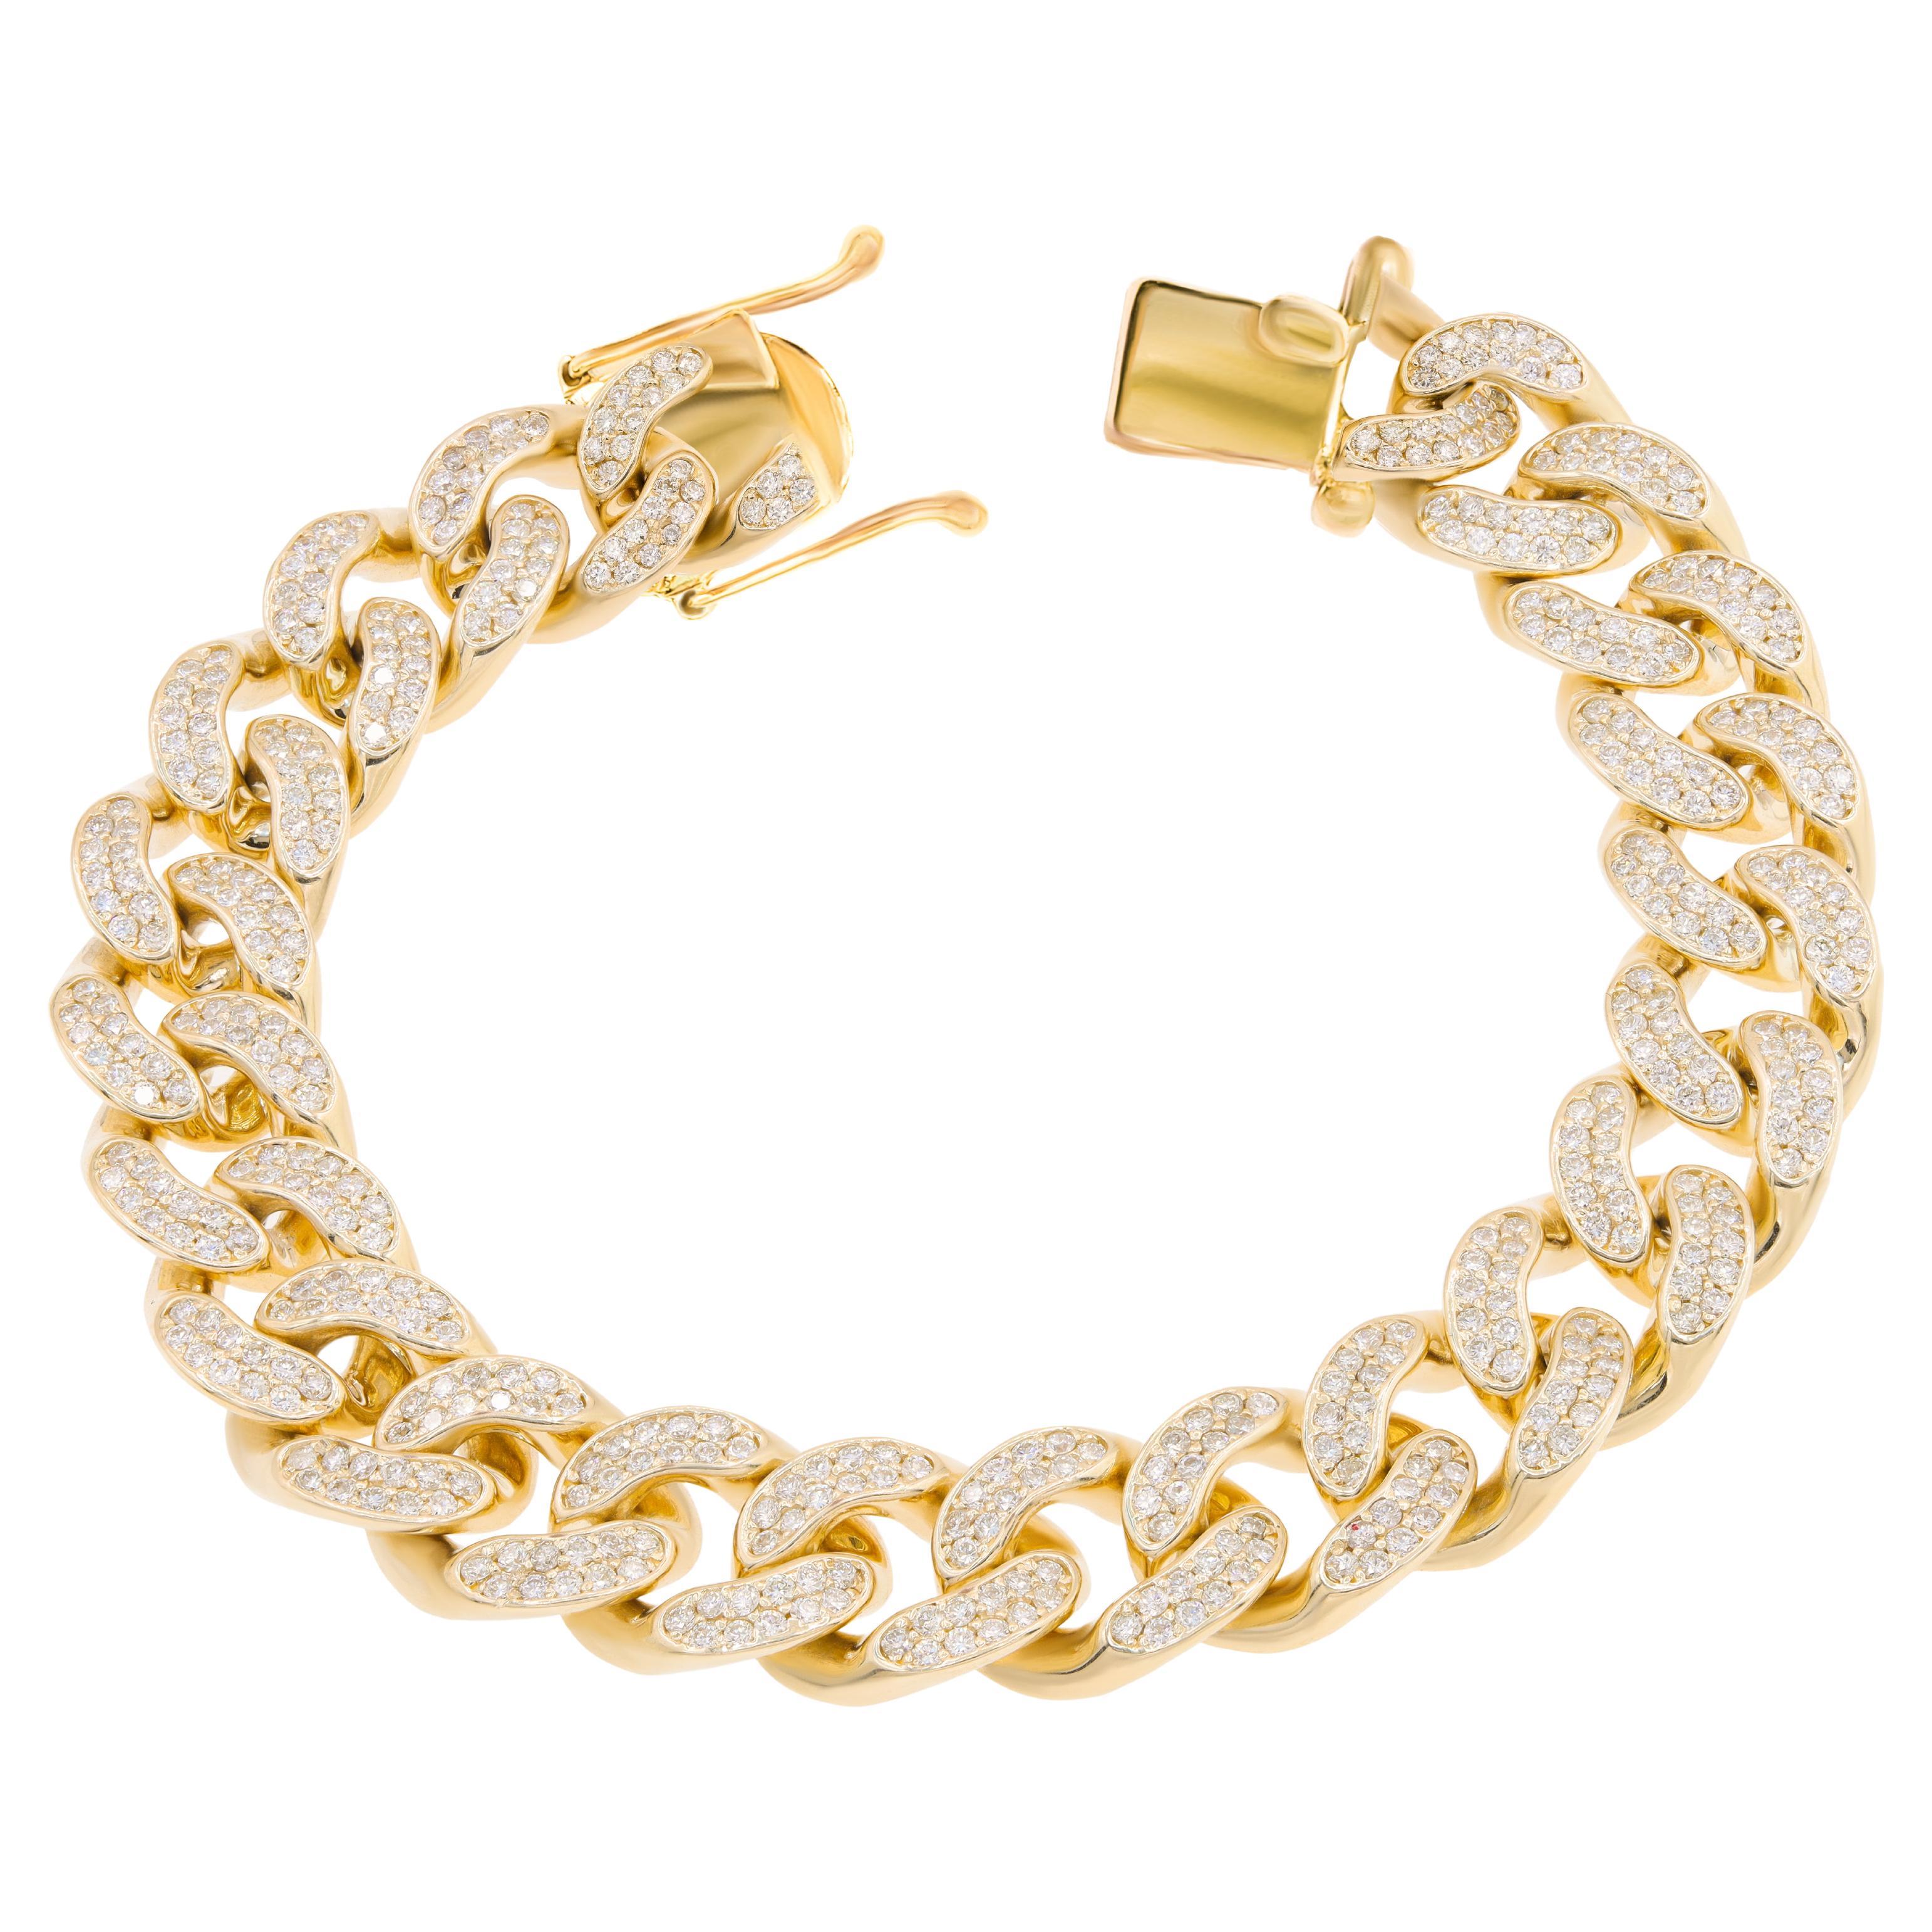 DIANA M. 14kt yellow gold pave linked bracelet featuring 6.00 cts of diamond